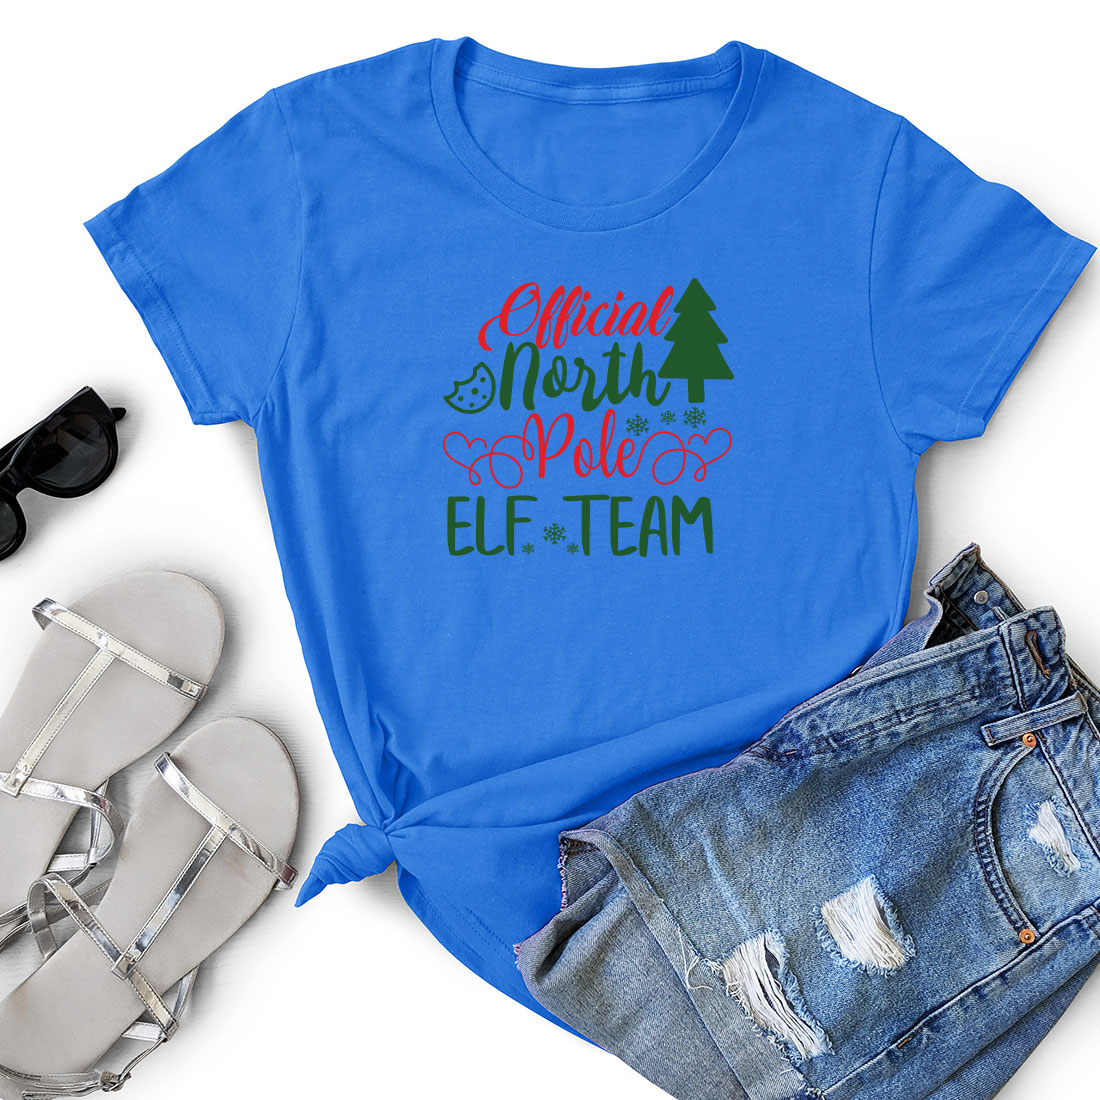 T - shirt that says merry north pole elf team next to a pair of.